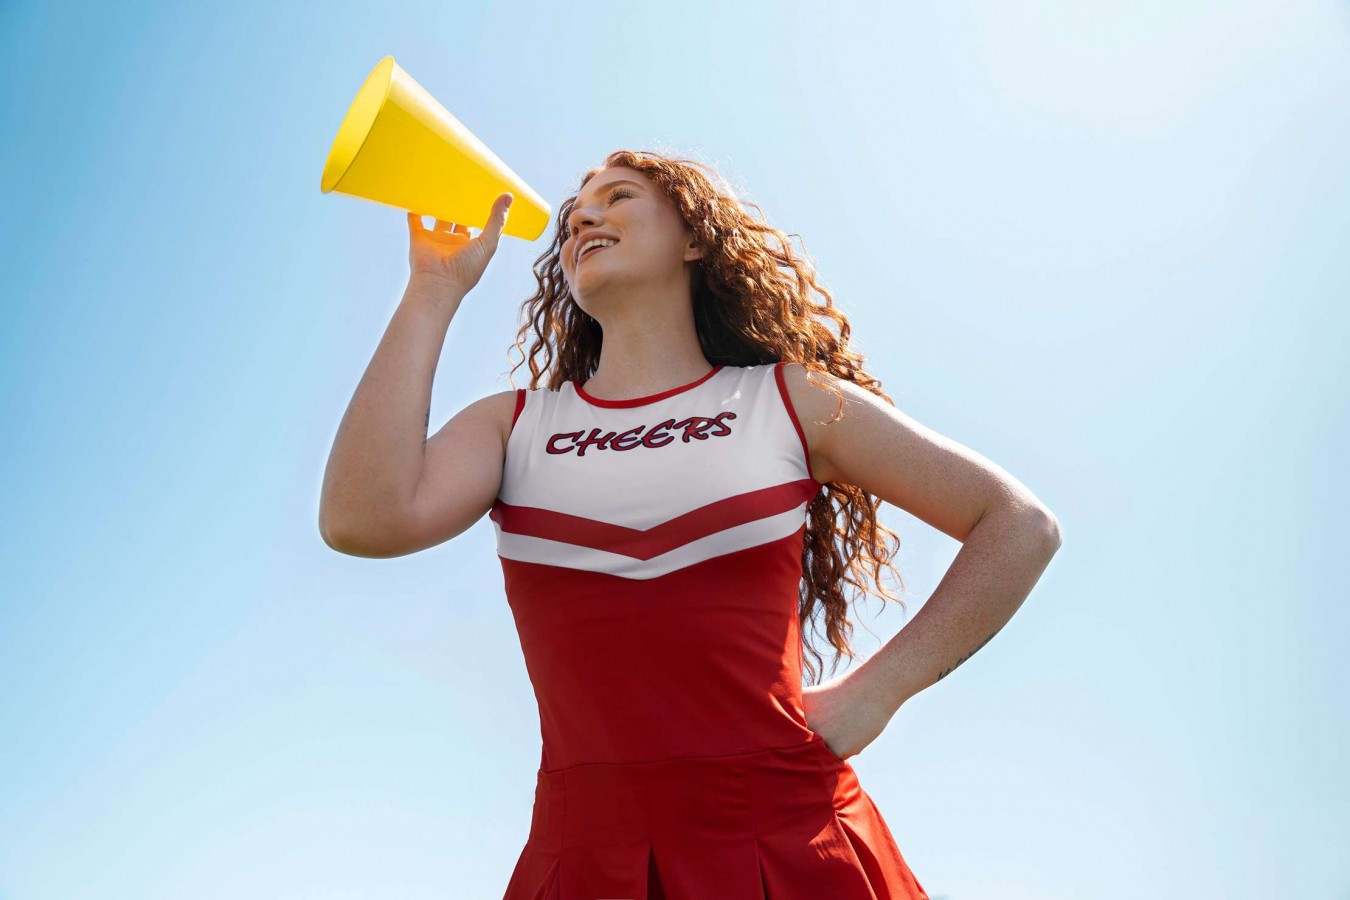 What Is Cheerleading? Definition, Role, Rules, and More